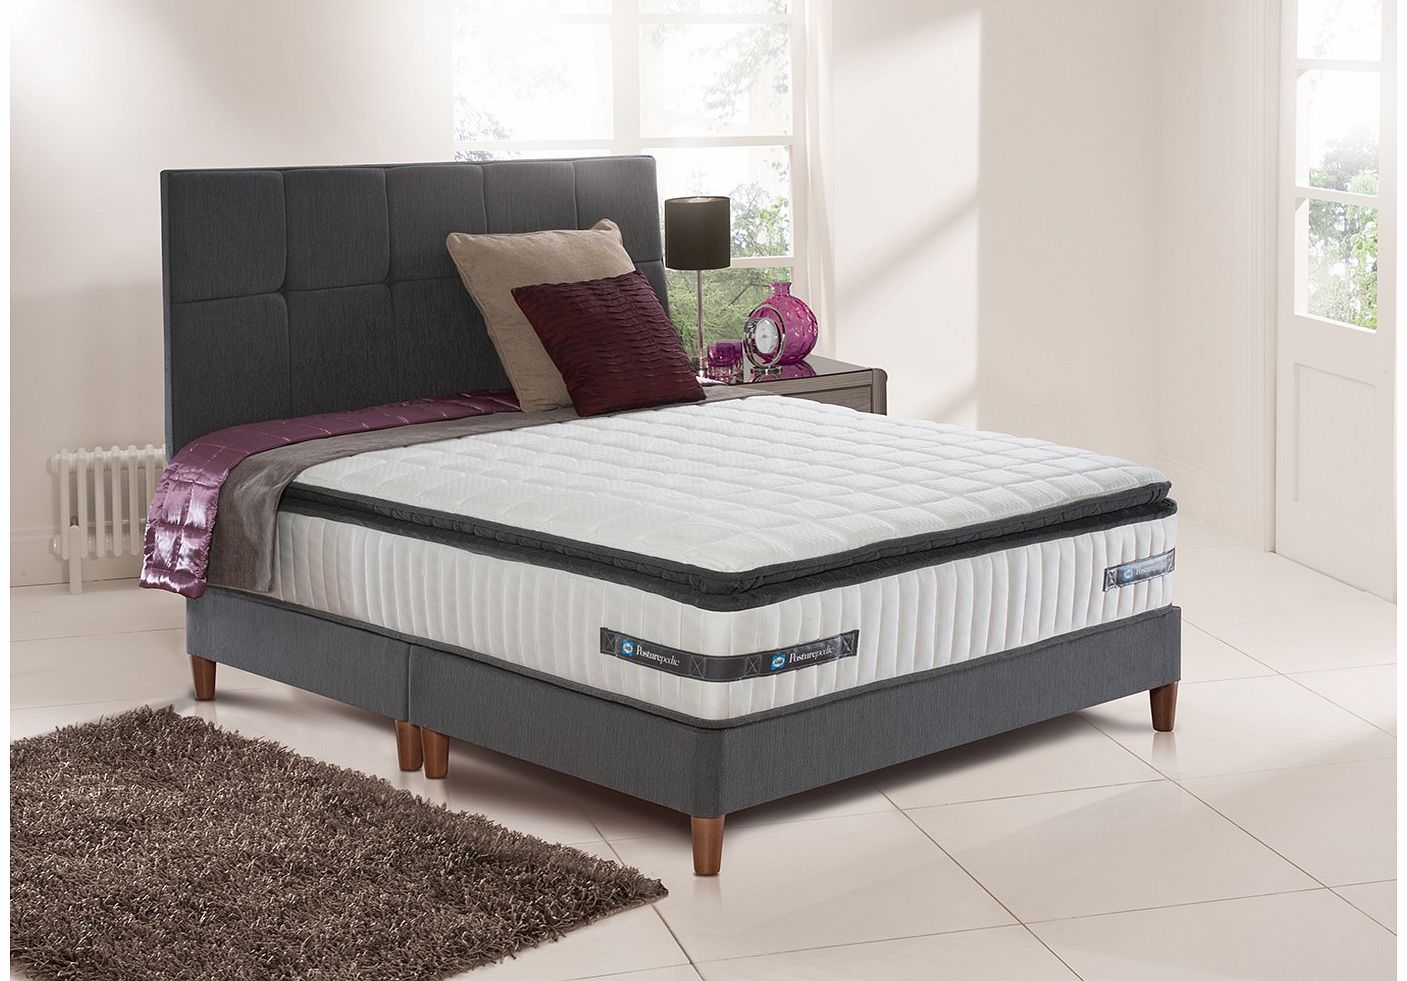 5`0 King Sealy Rushton Pocket Spring Divan Bed with Legs